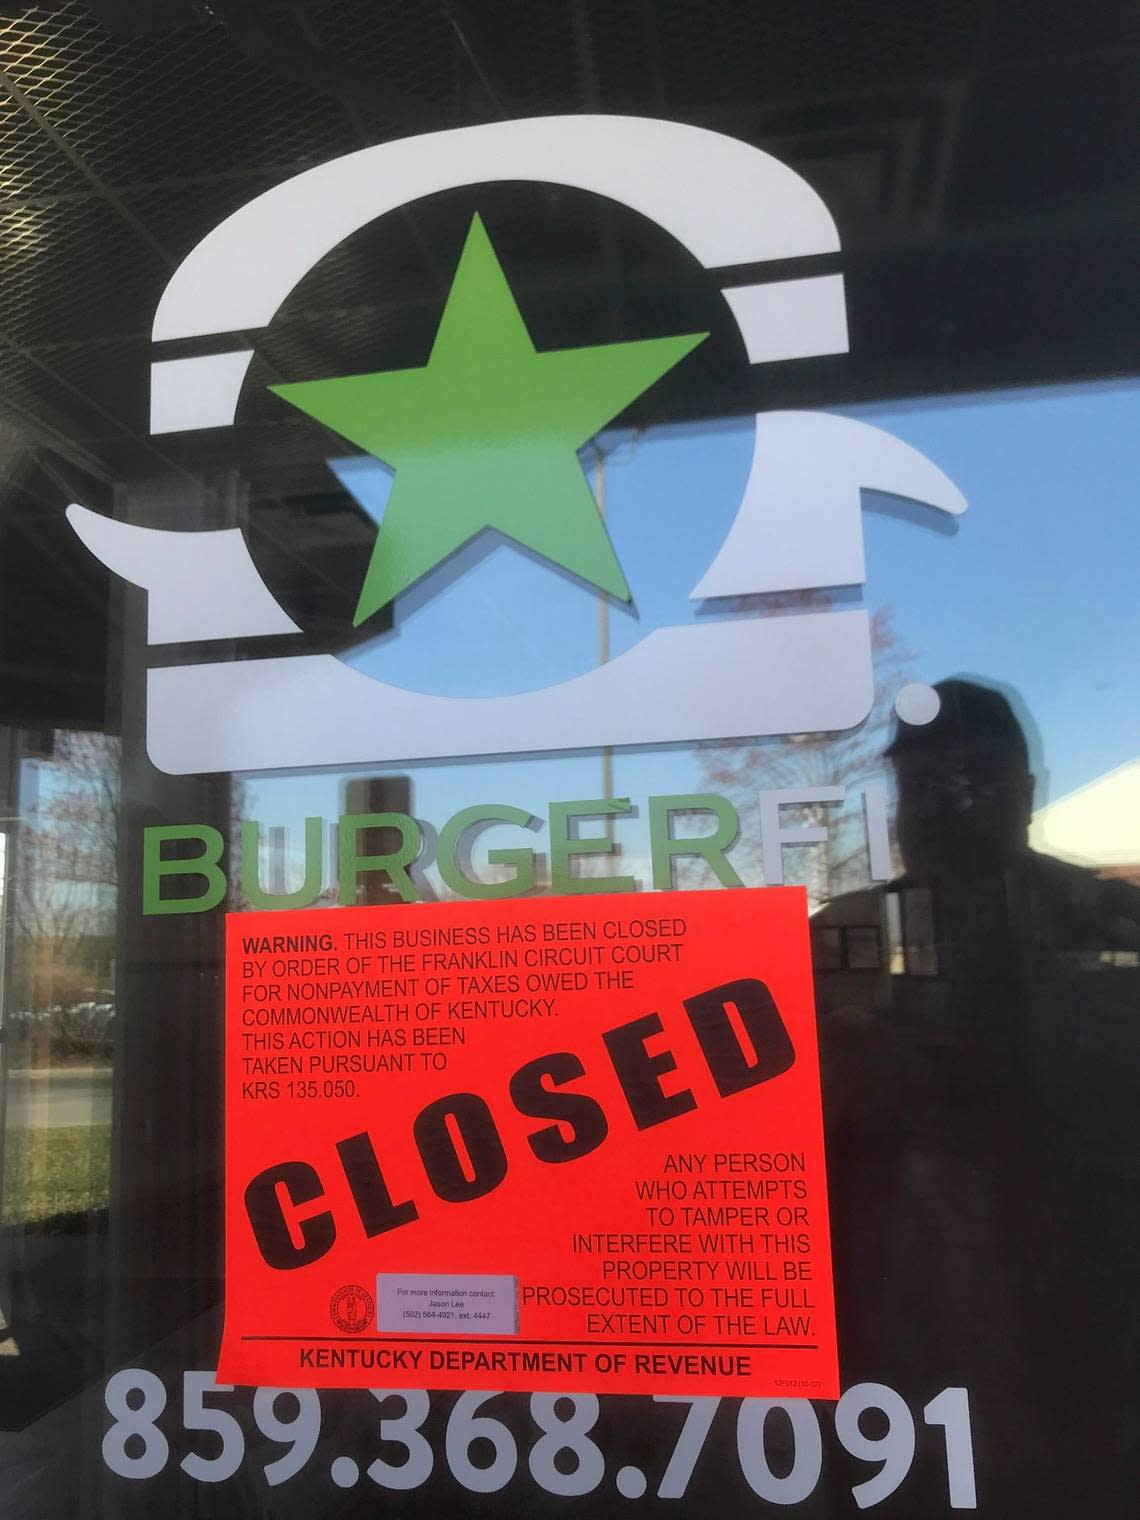 In March, the BurgerFi location in Hamburg had signs on the door that say “This Business Has Been Closed By Order of the Franklin Circuit Court for Nonpayment of Taxes Owed the Commonwealth of Kentucky.” An eviction notice also was taped to the door. Tom Stone